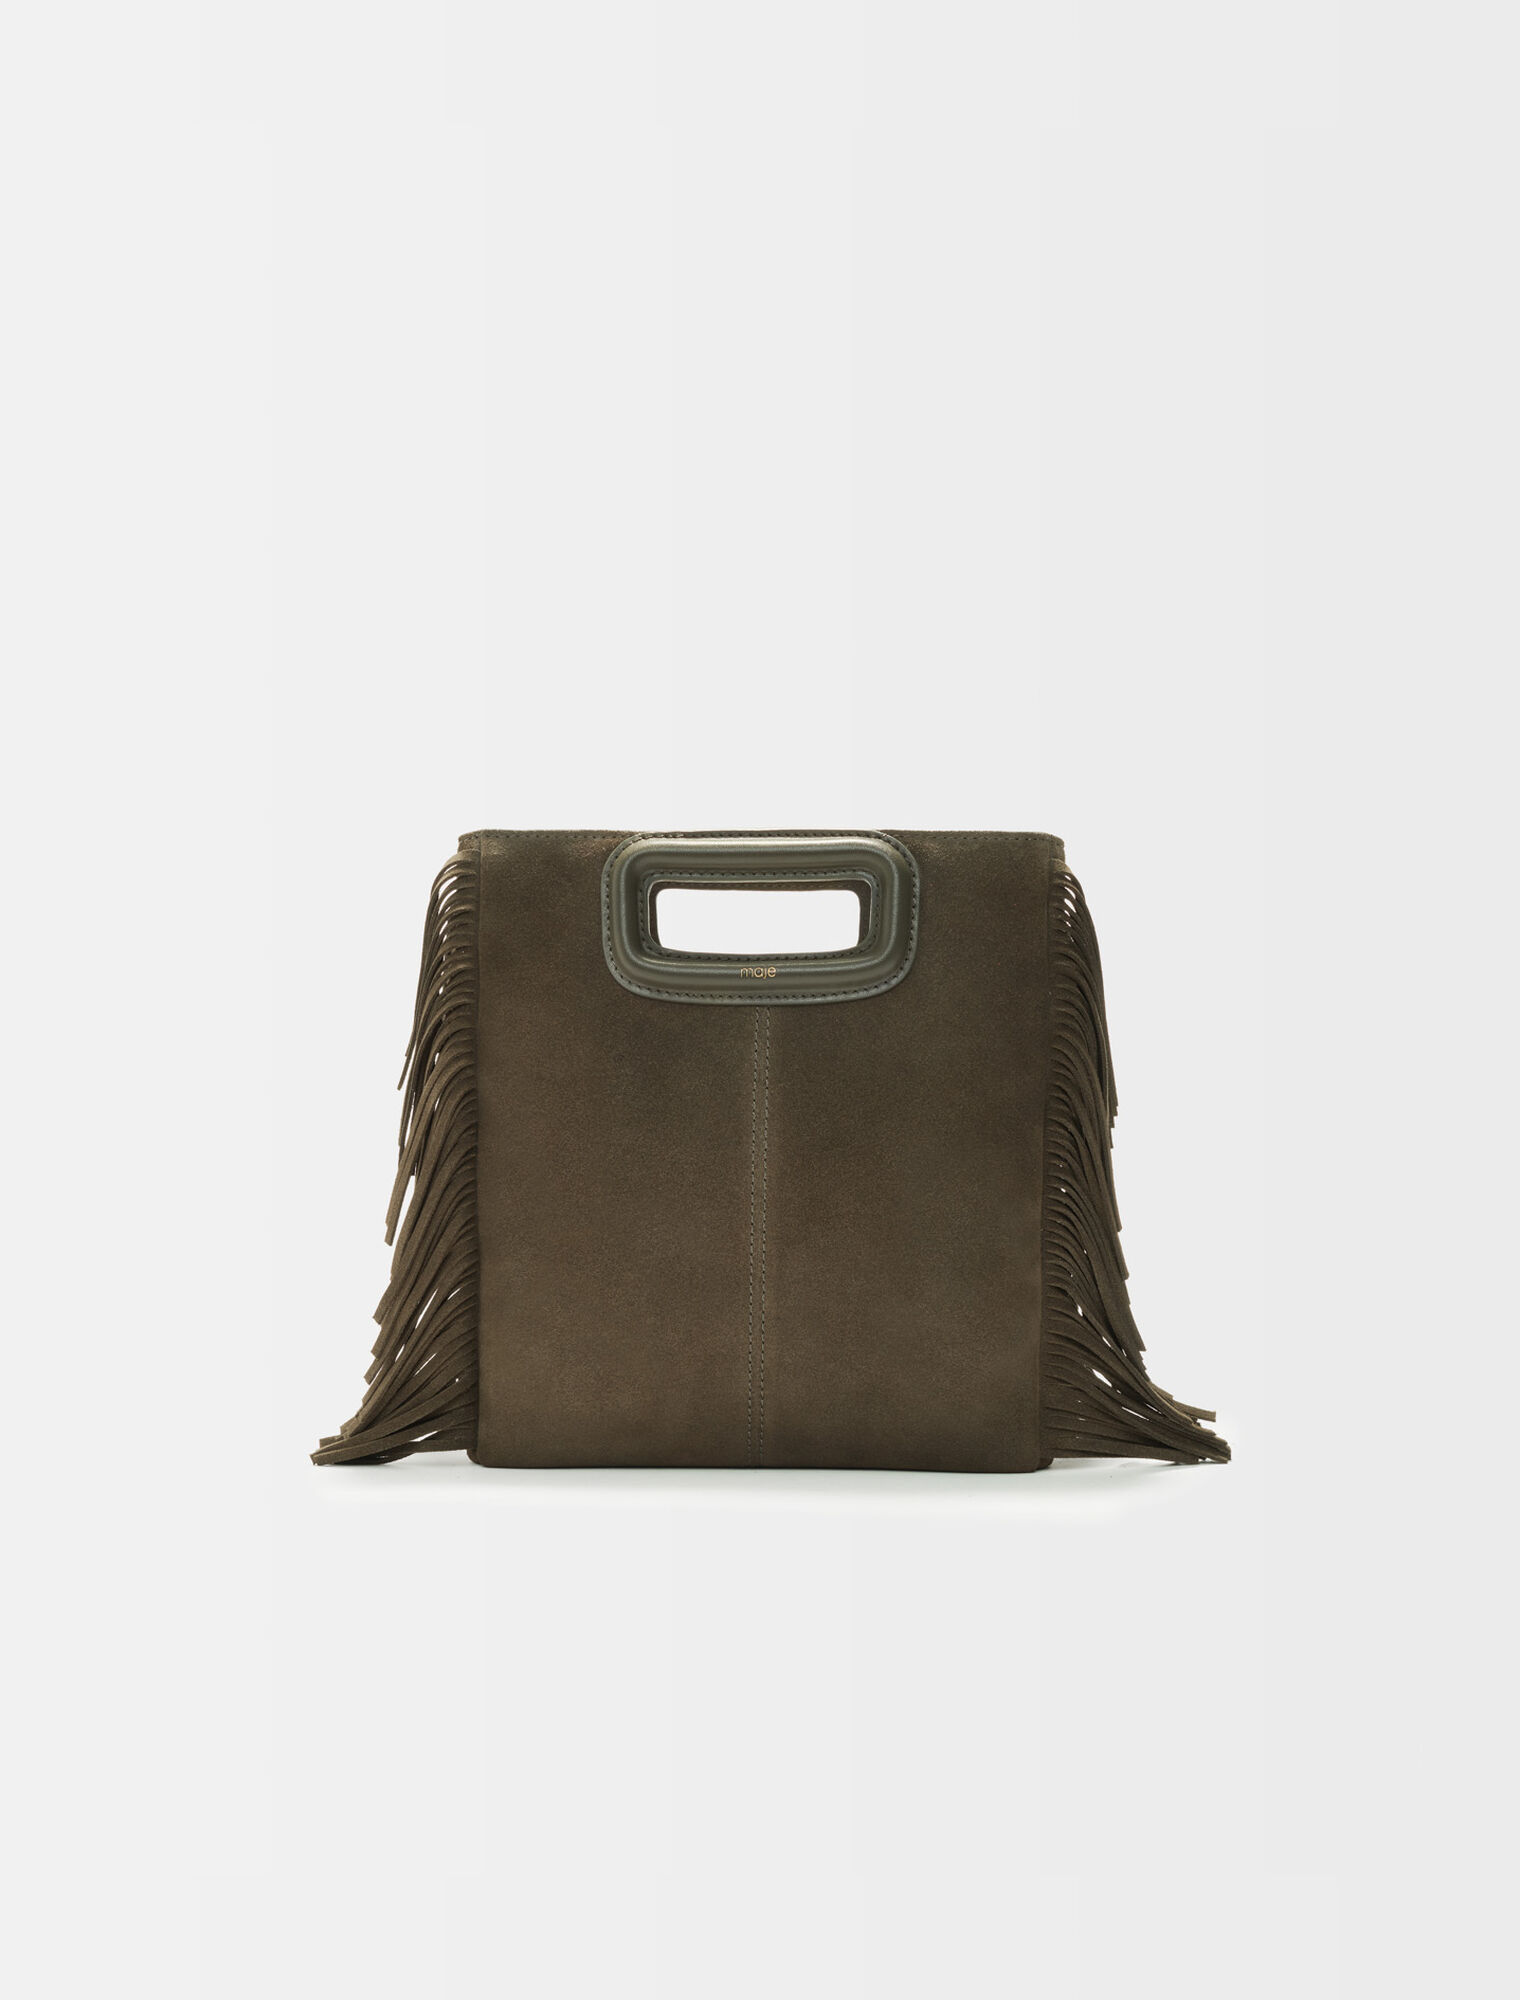 M bag in suede leather